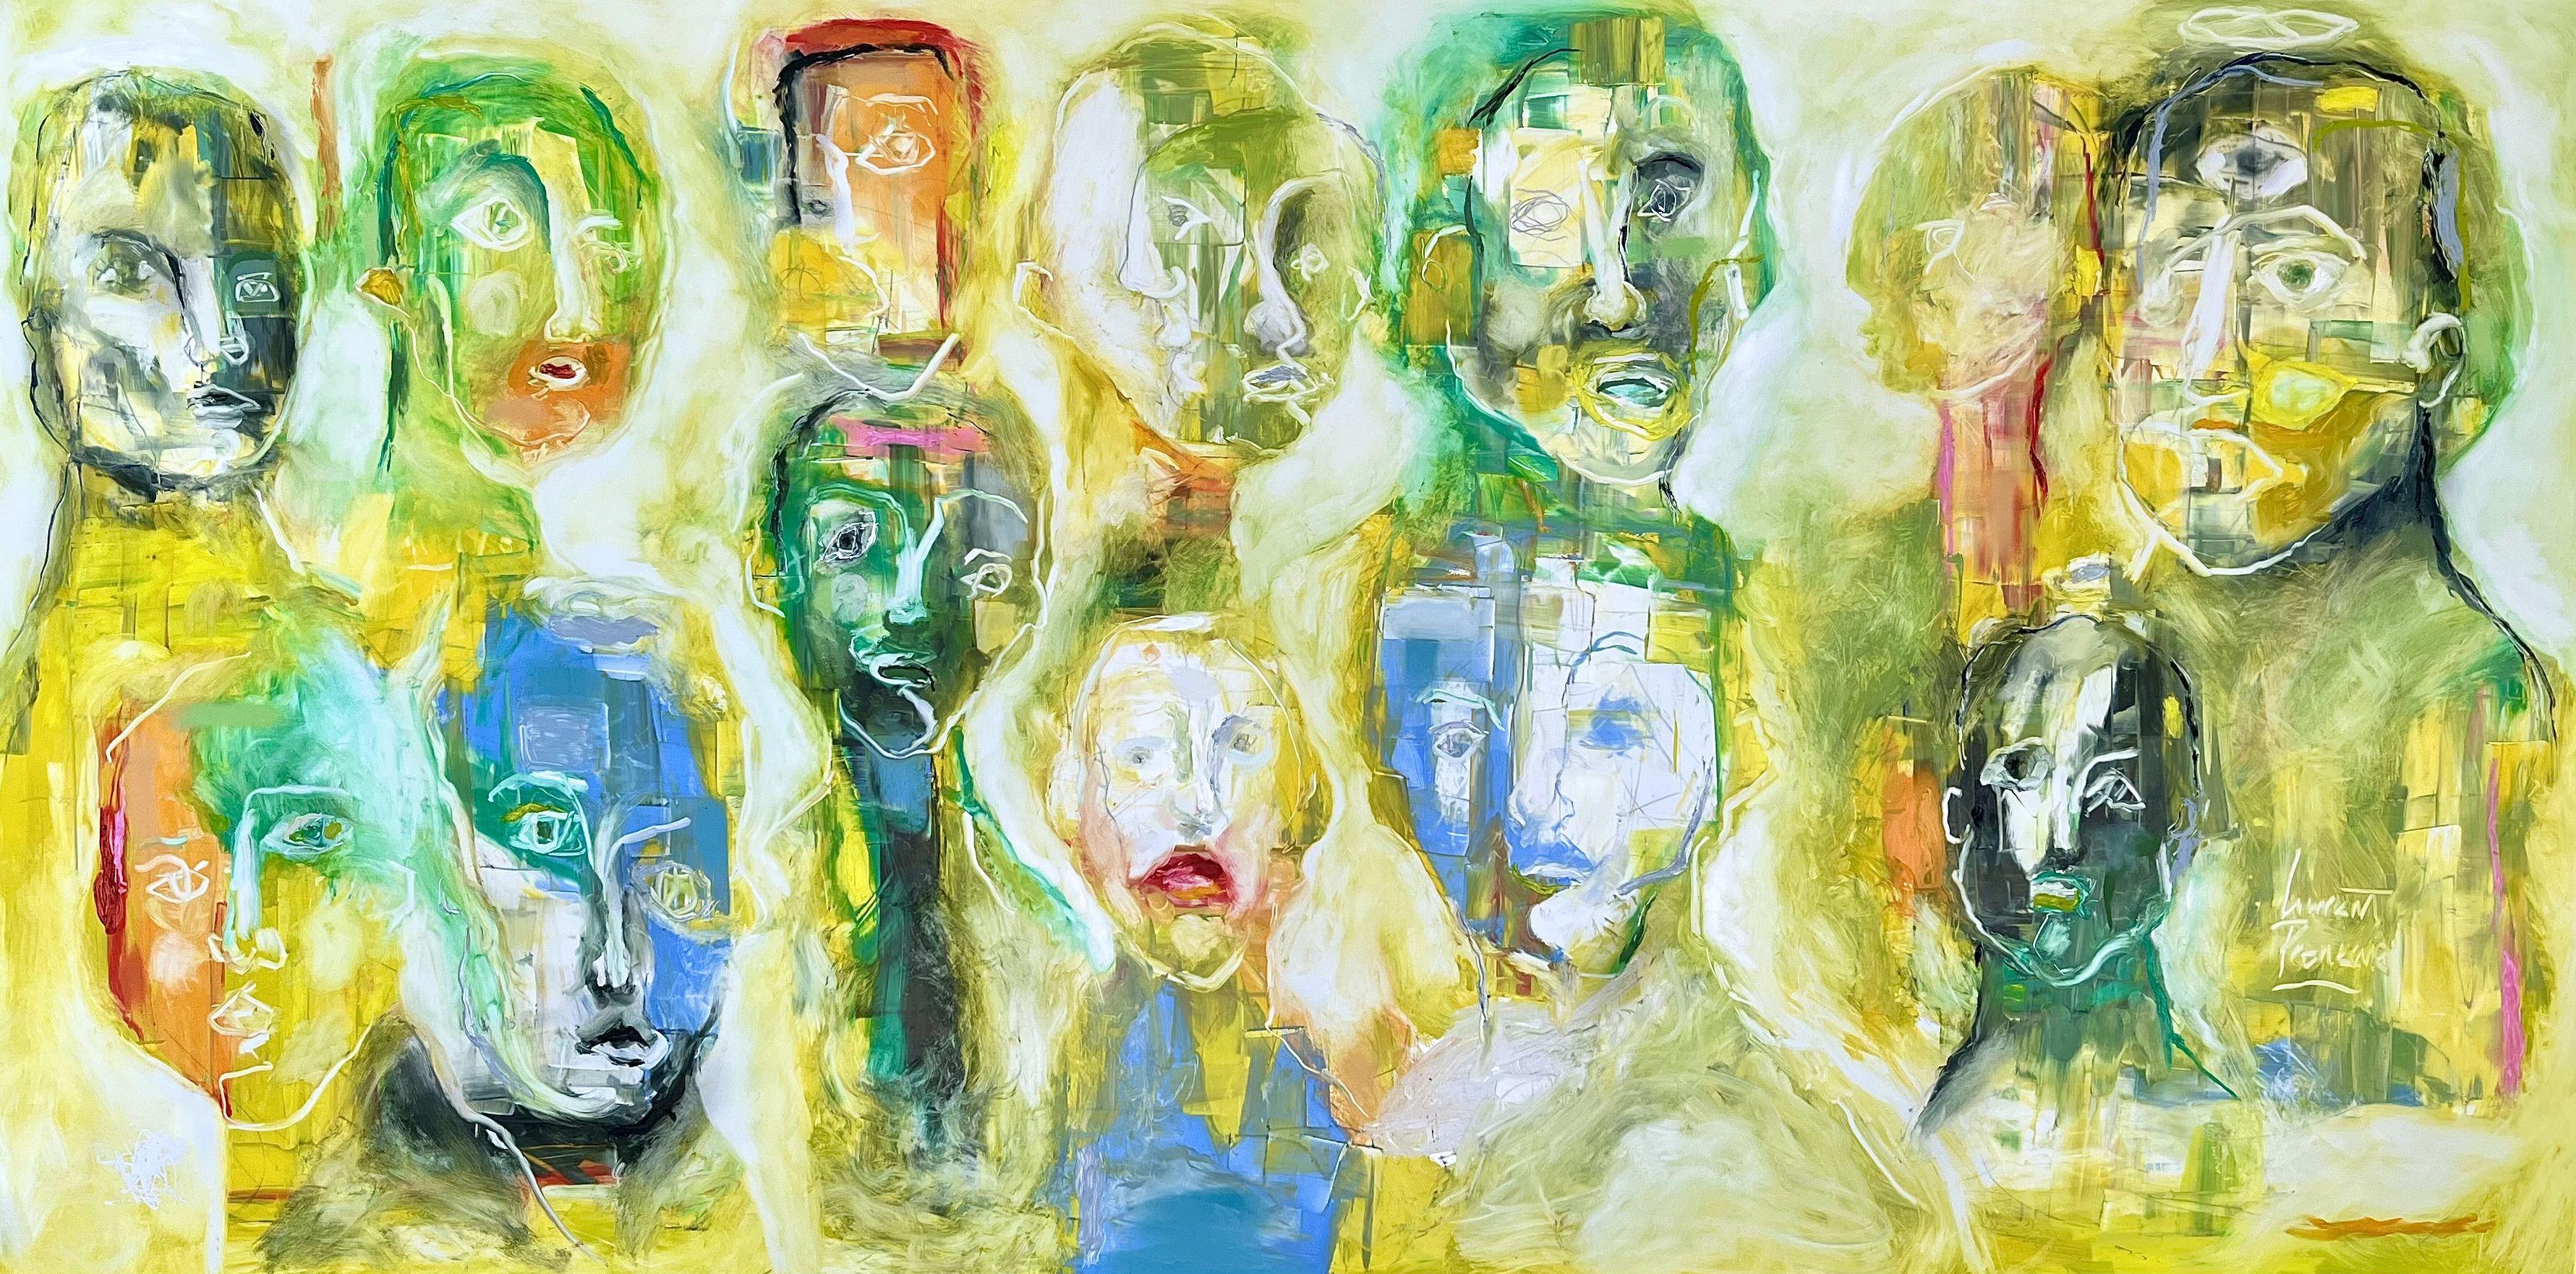 Here they are, in the center of attention, the performer is watching them... they are spectators. :: Painting :: Abstract Expressionism :: This piece comes with an official certificate of authenticity signed by the artist :: Ready to Hang: Yes ::